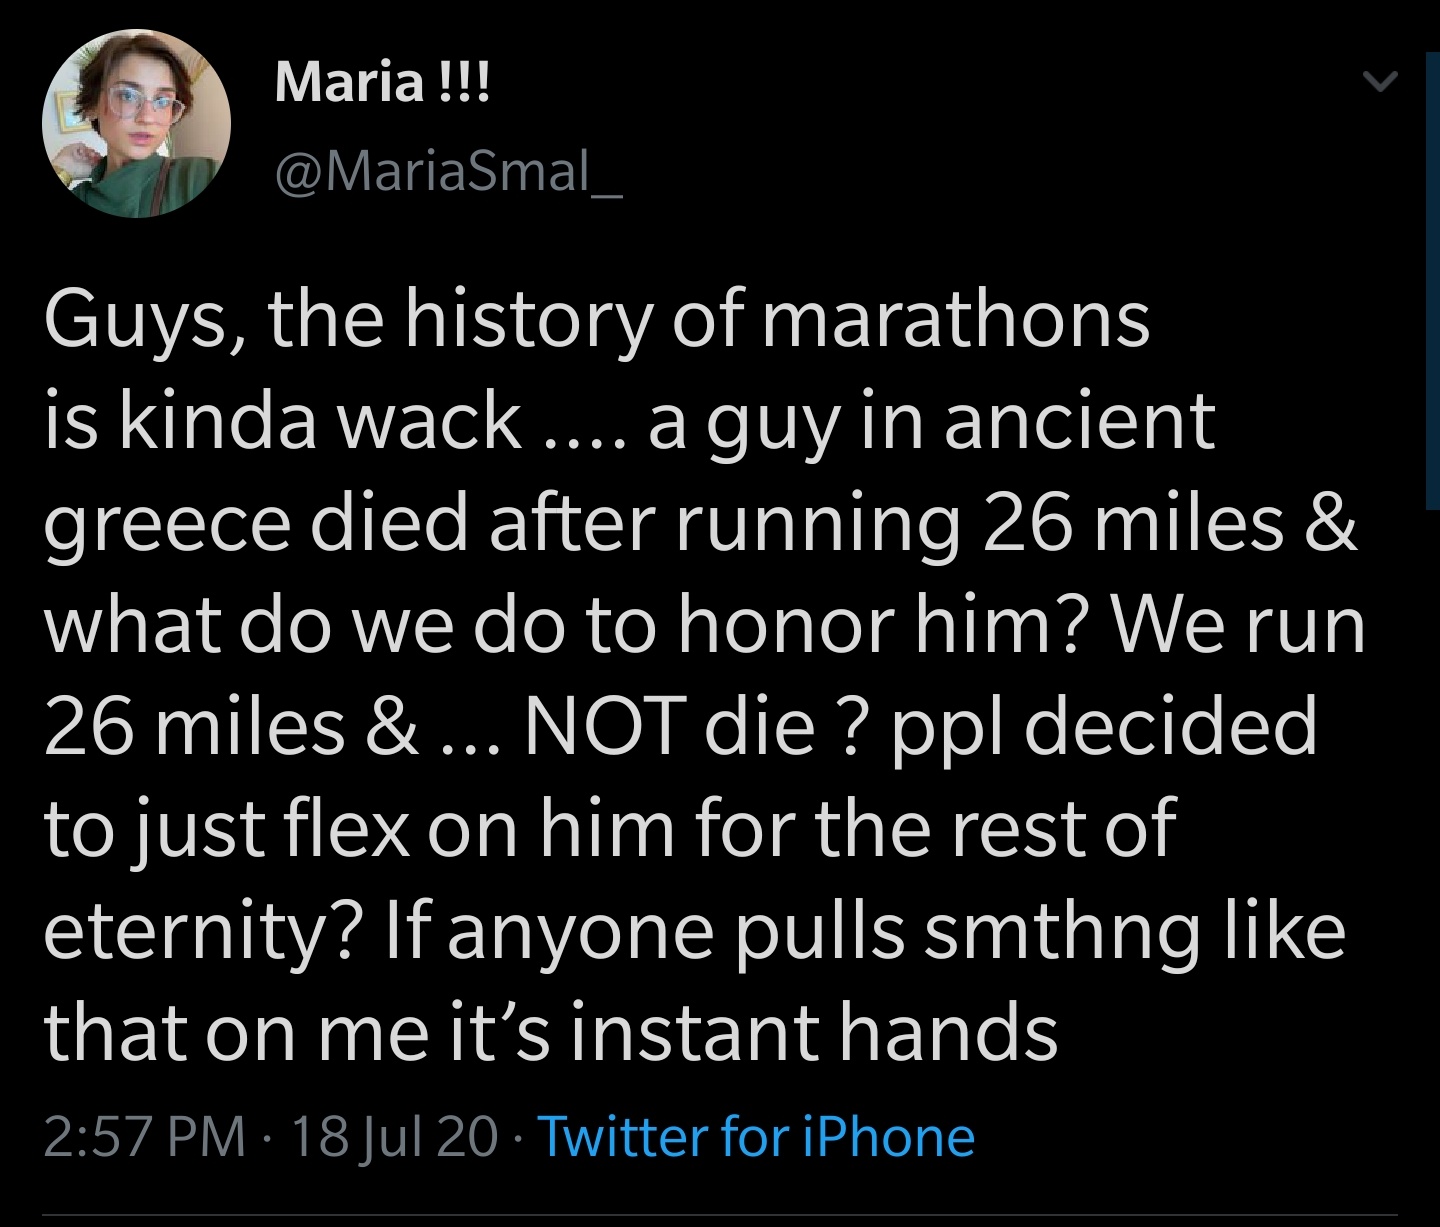 funny memes and pics - history of marathons is whack - Maria !!! Guys, the history of marathons is kinda wack .... a guy in ancient greece died after running 26 miles & what do we do to honor him? We run 26 miles &... Not die ? ppl decided to just flex on